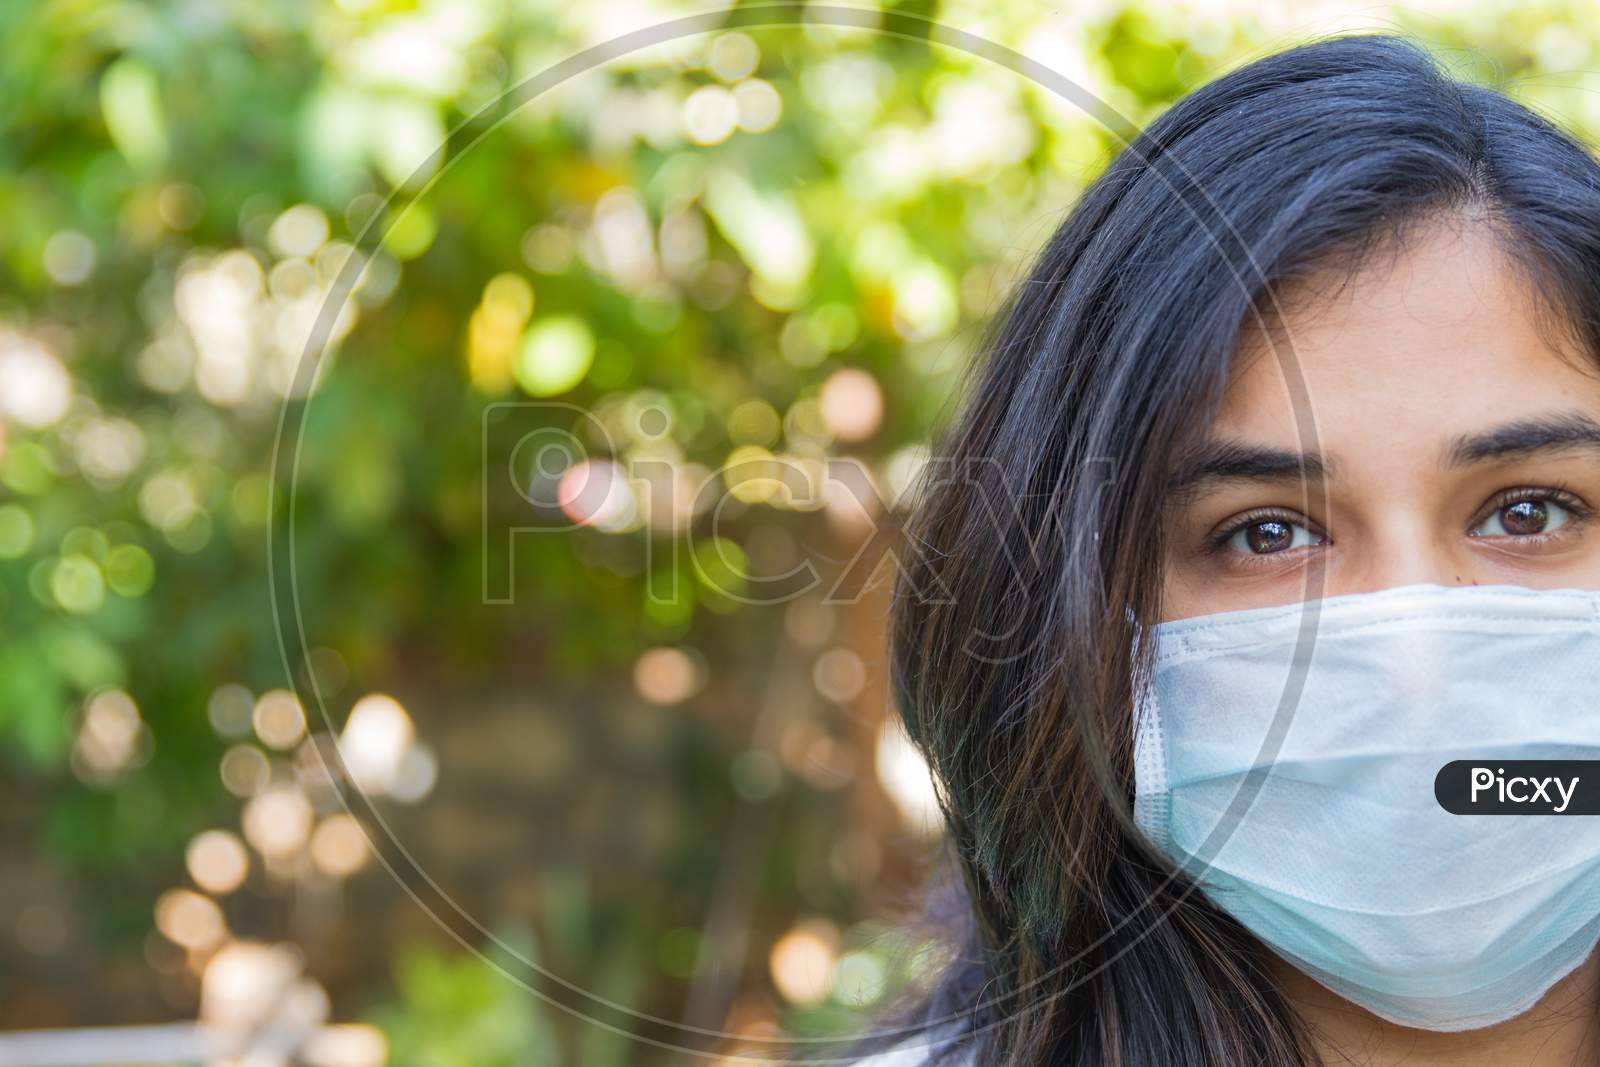 Half Face Portrait Of An Indian Girl Wearing A Face Mask During Covid 19 Pandemic As The Lock Down Continues In India Due To Increasing Spread Of Corona Virus Outbreak